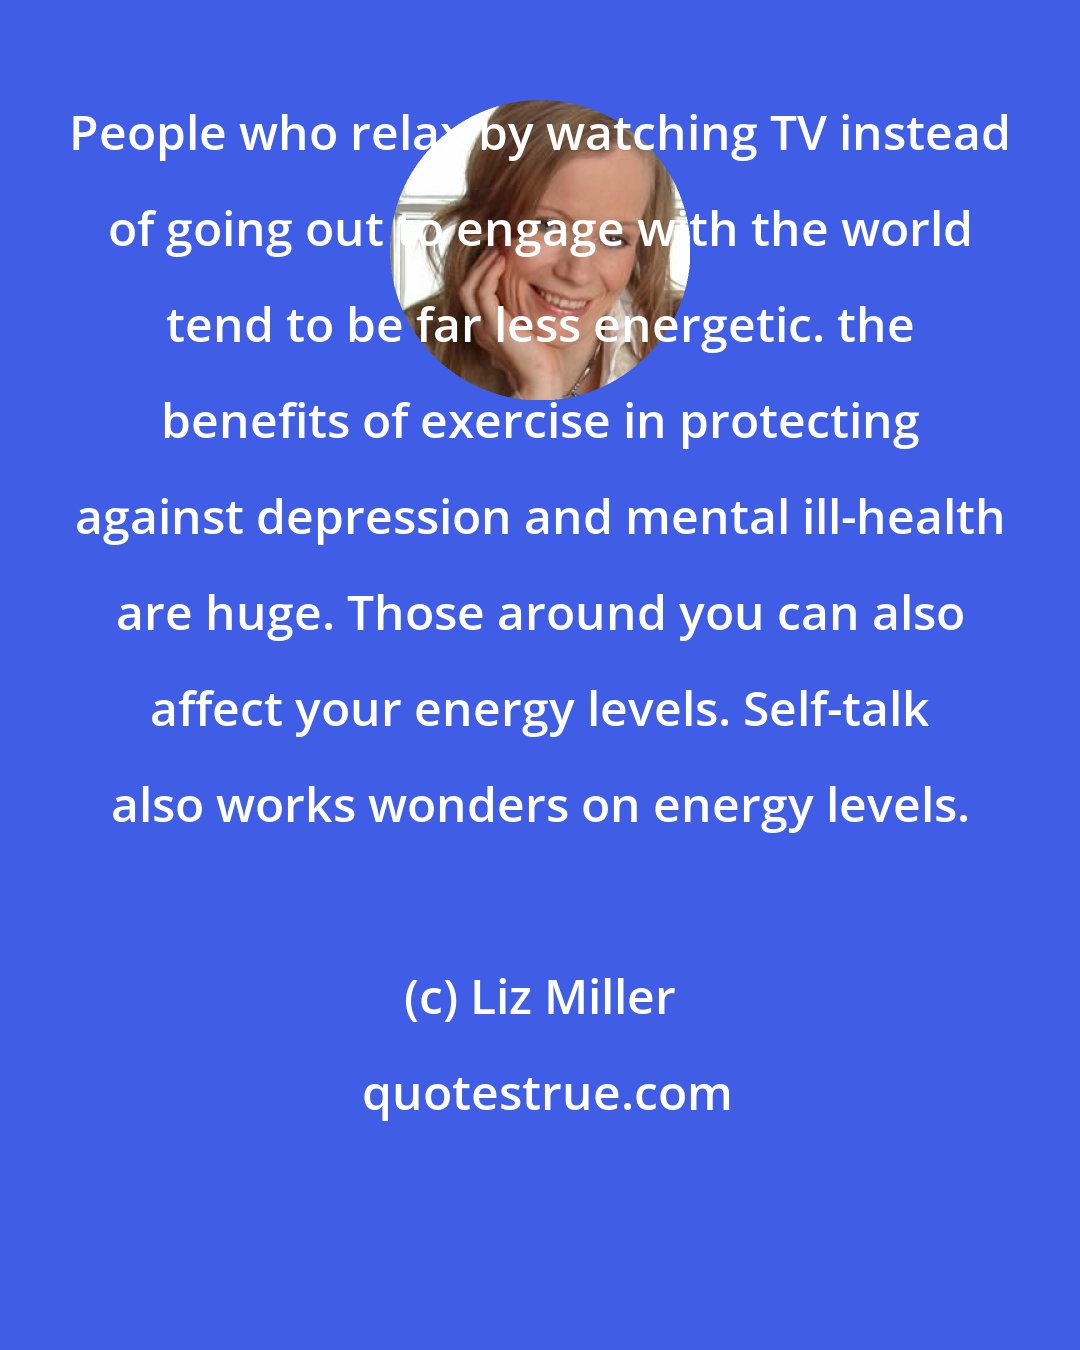 Liz Miller: People who relax by watching TV instead of going out to engage with the world tend to be far less energetic. the benefits of exercise in protecting against depression and mental ill-health are huge. Those around you can also affect your energy levels. Self-talk also works wonders on energy levels.